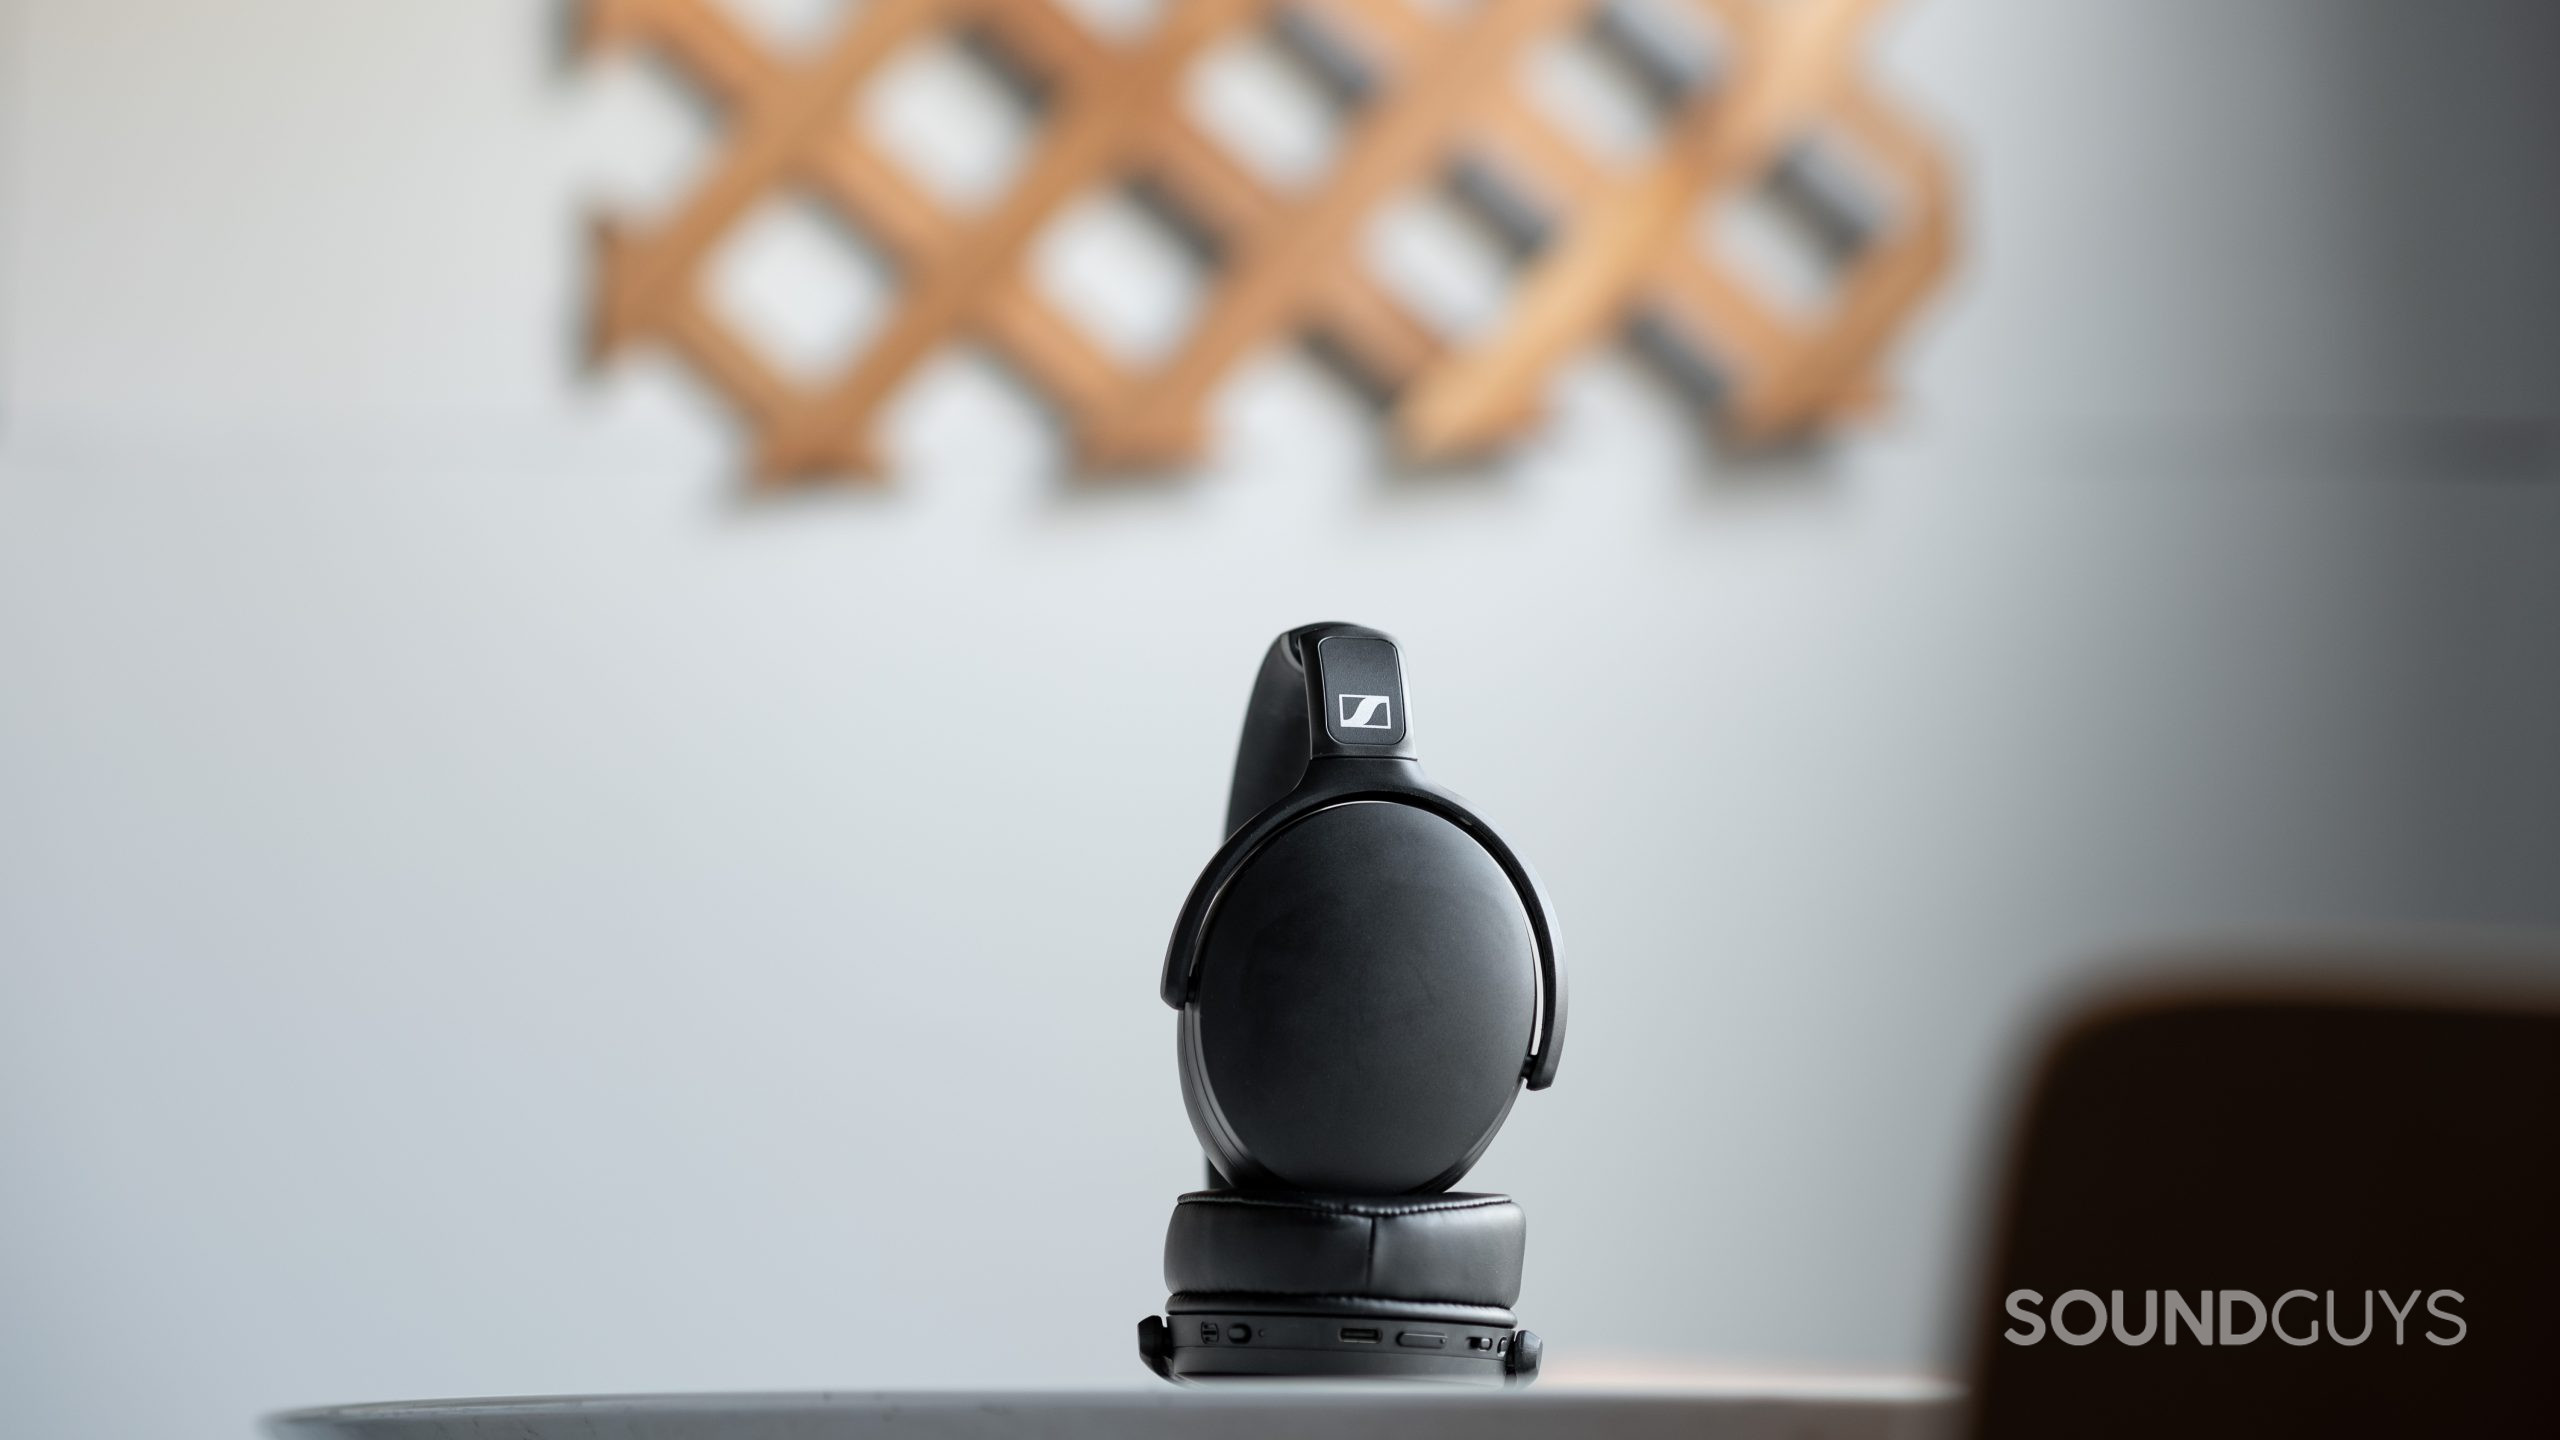 The Sennheiser HD 350BT Bluetooth headphones folded slightly on a table in front of an off-white wall.